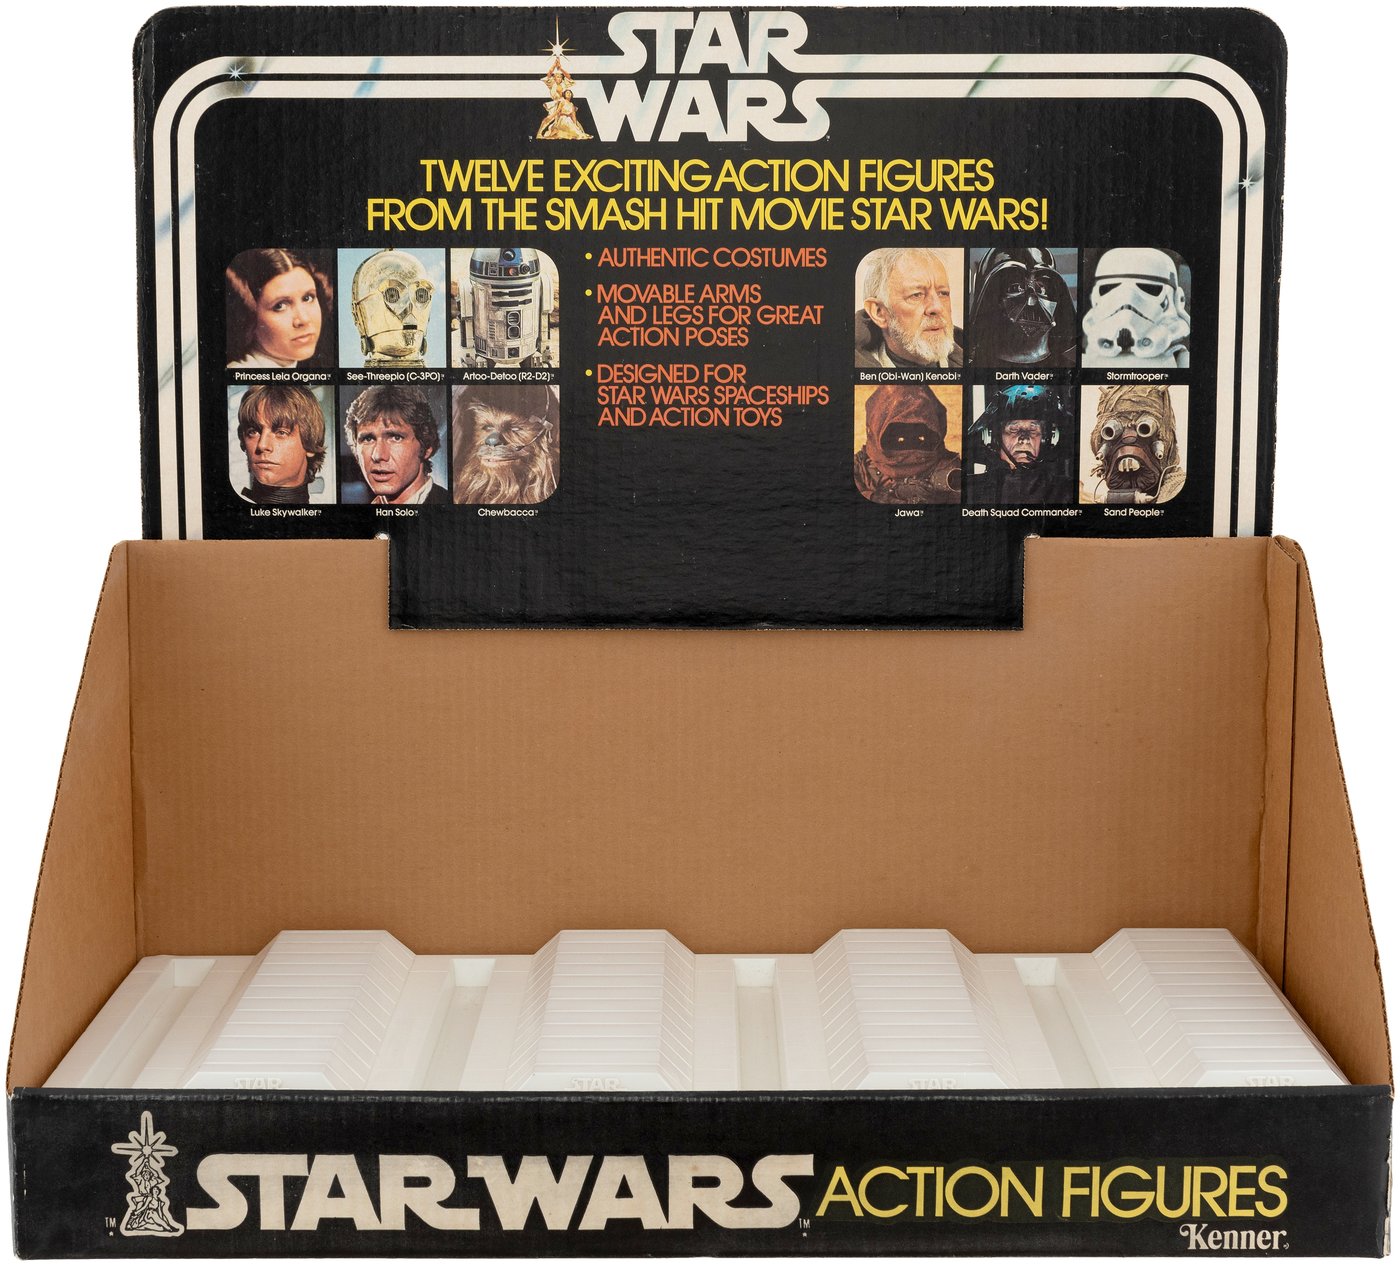 1977 First 12 Vintage Star Wars Figures With Case, Insert And Trays.